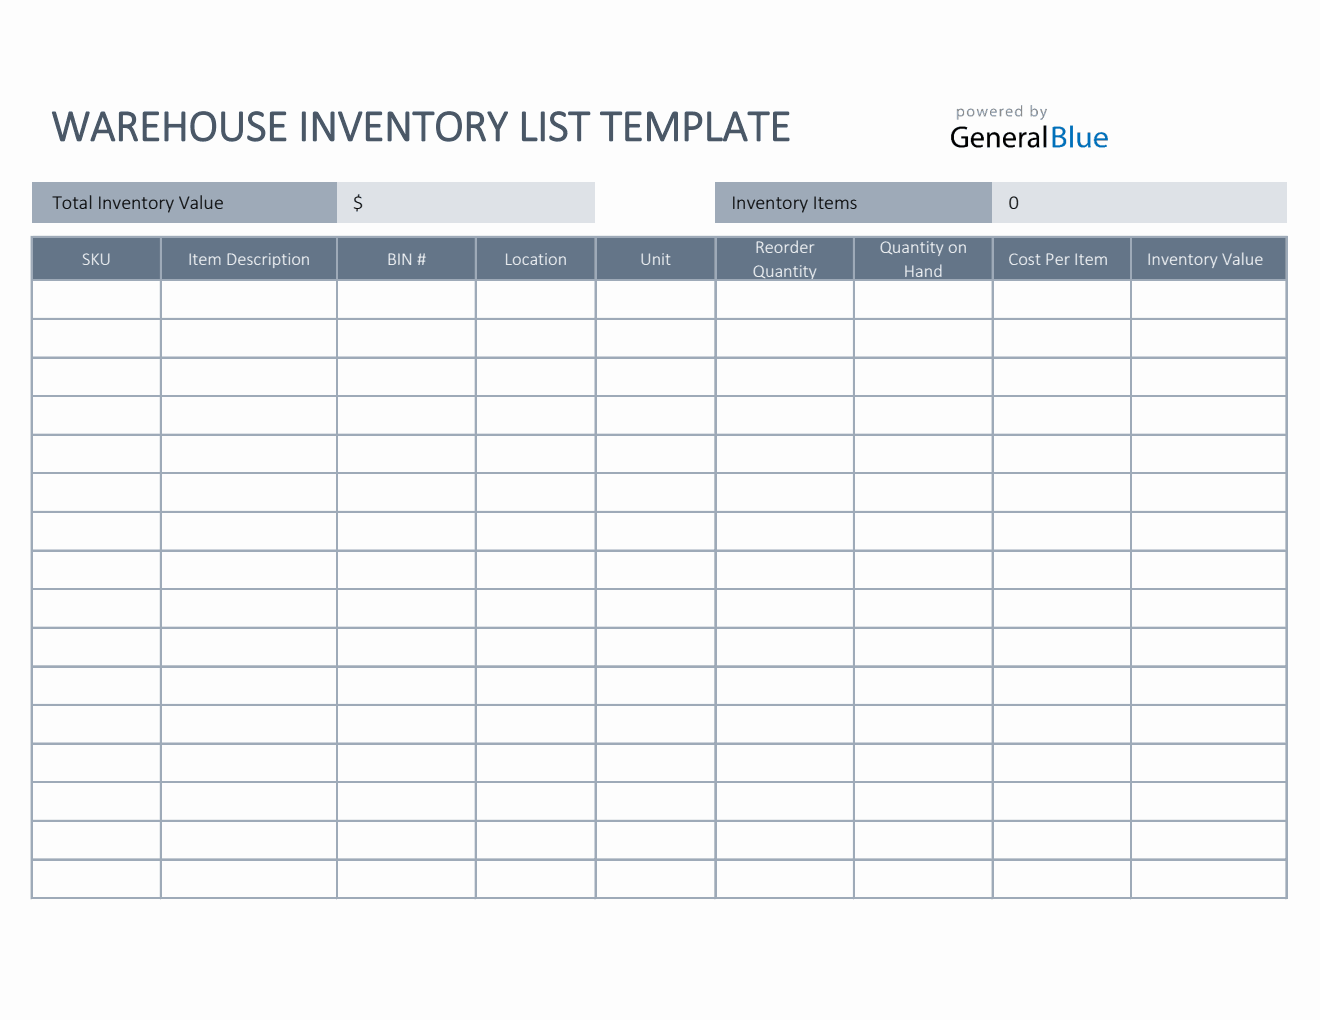 Warehouse Inventory List Template in Excel